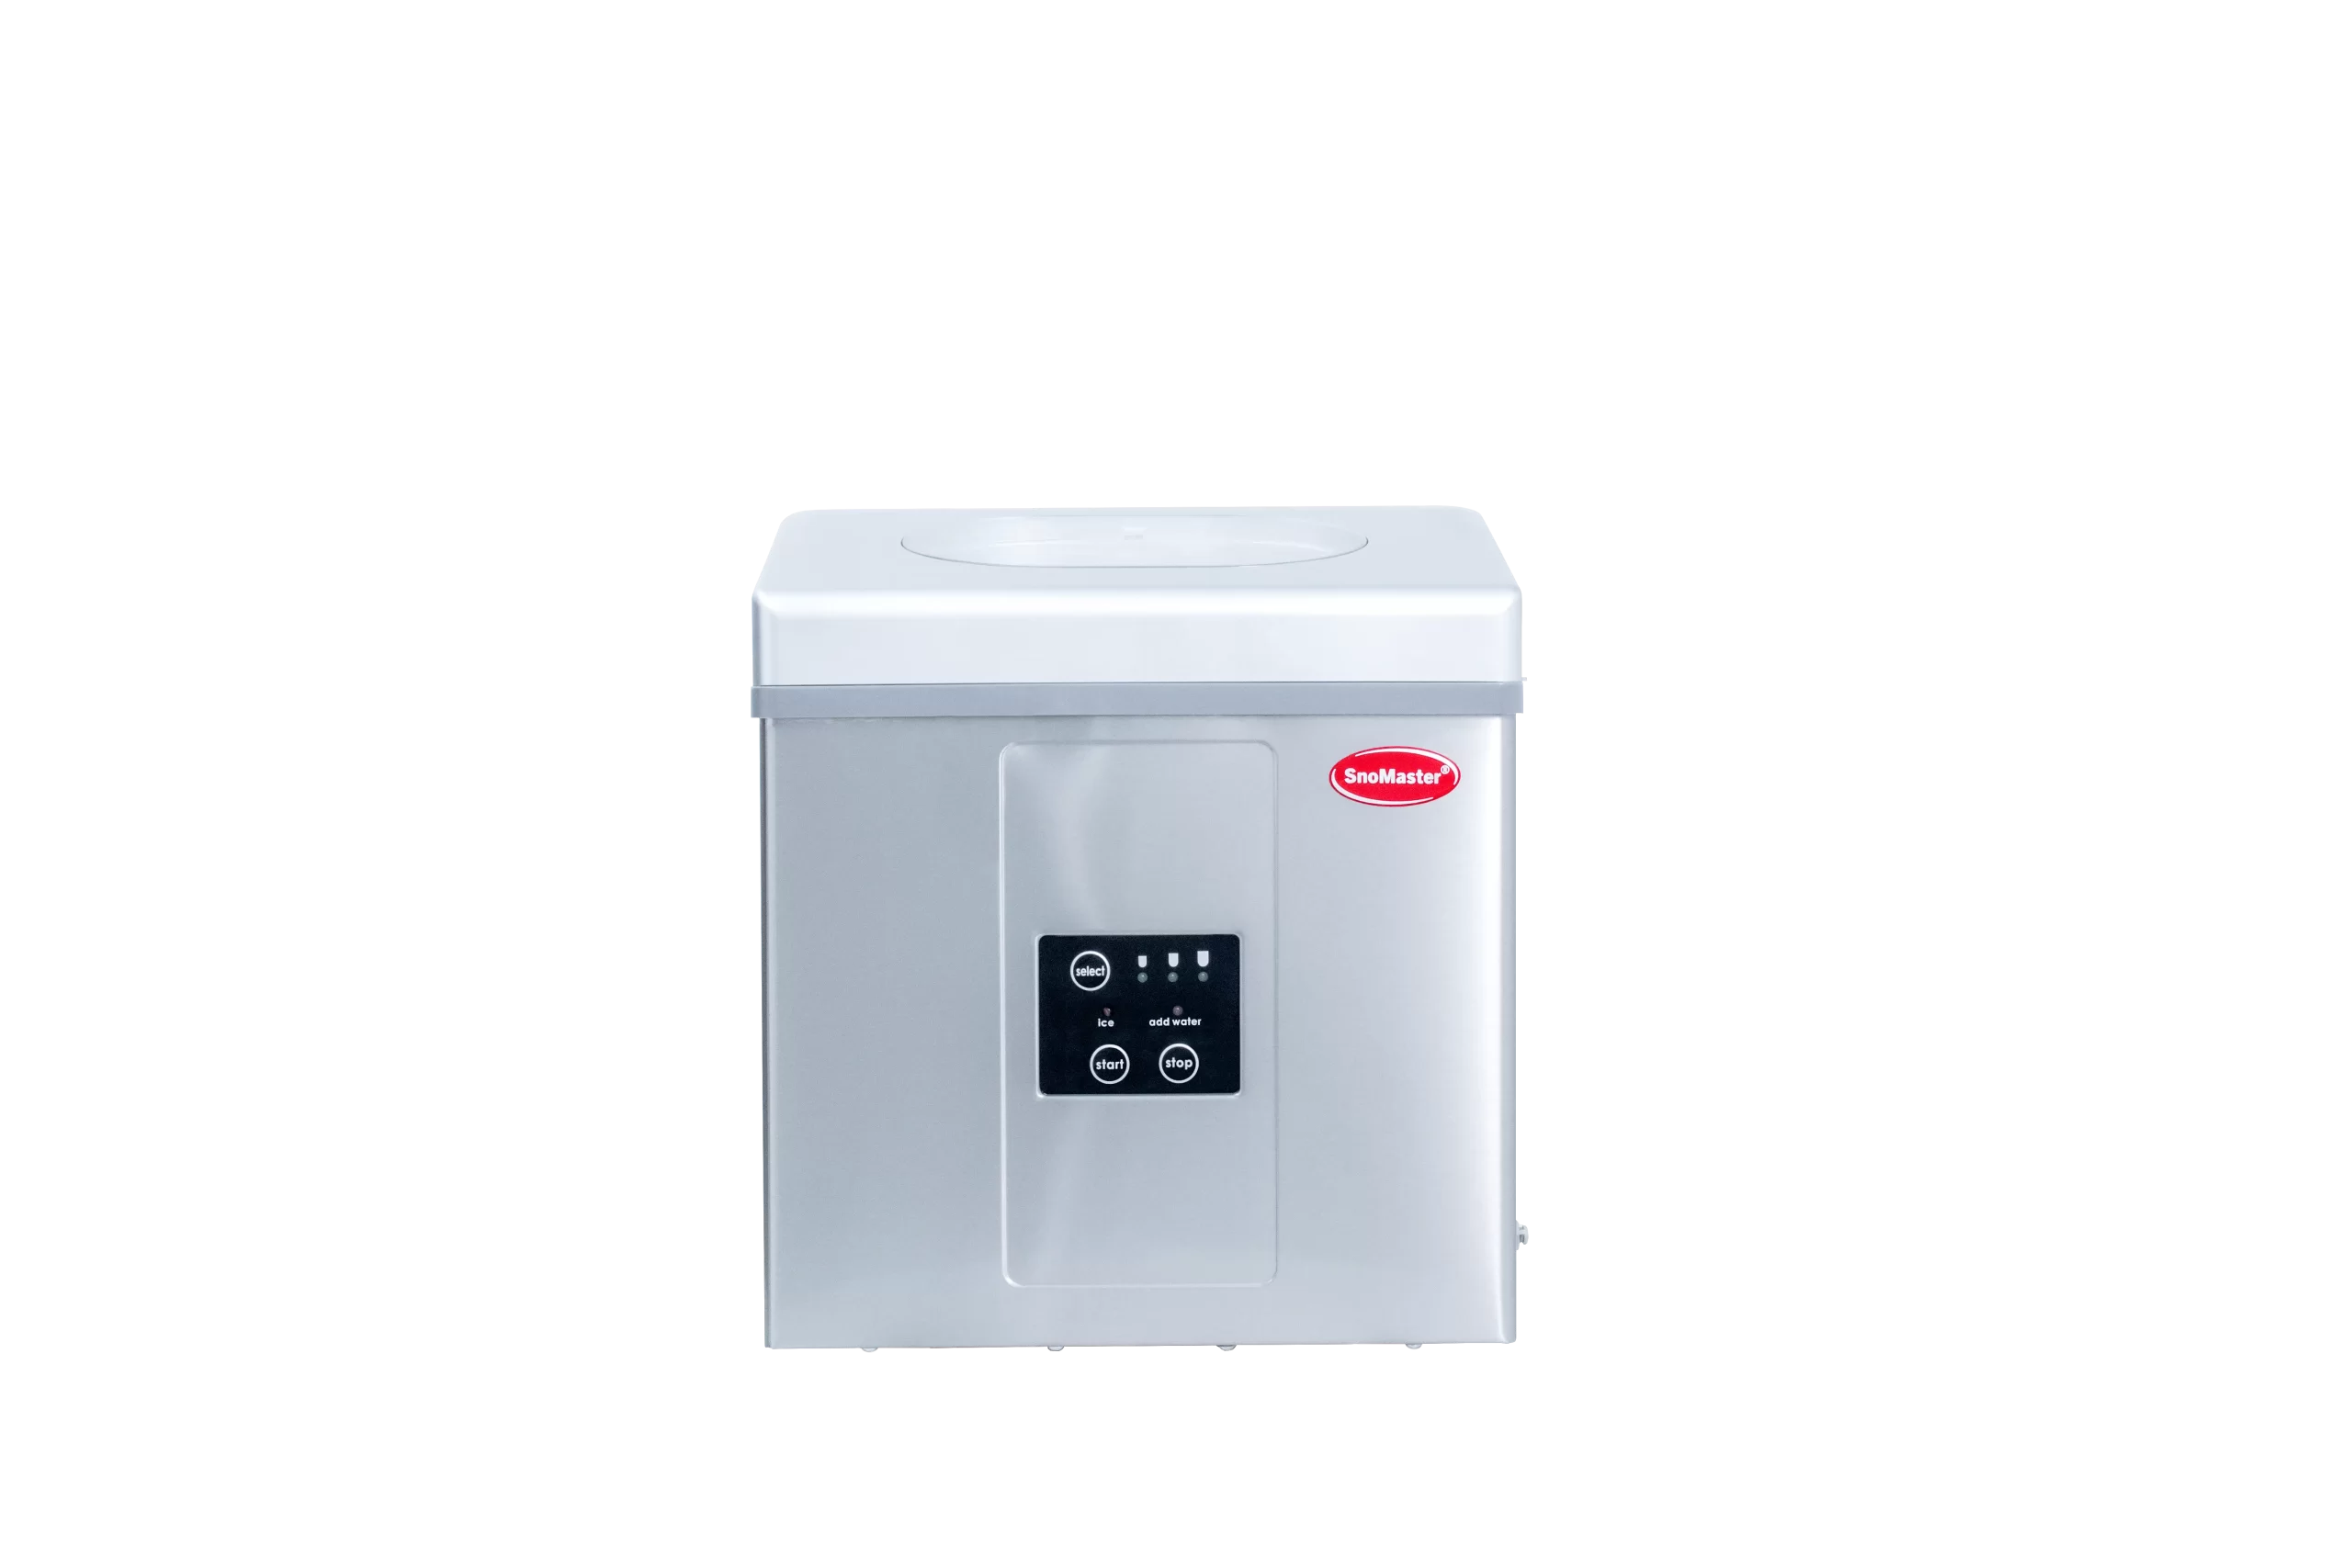 Ice Makers: SnoMaster 15KG Counter Top Ice Maker (ZBC-15)